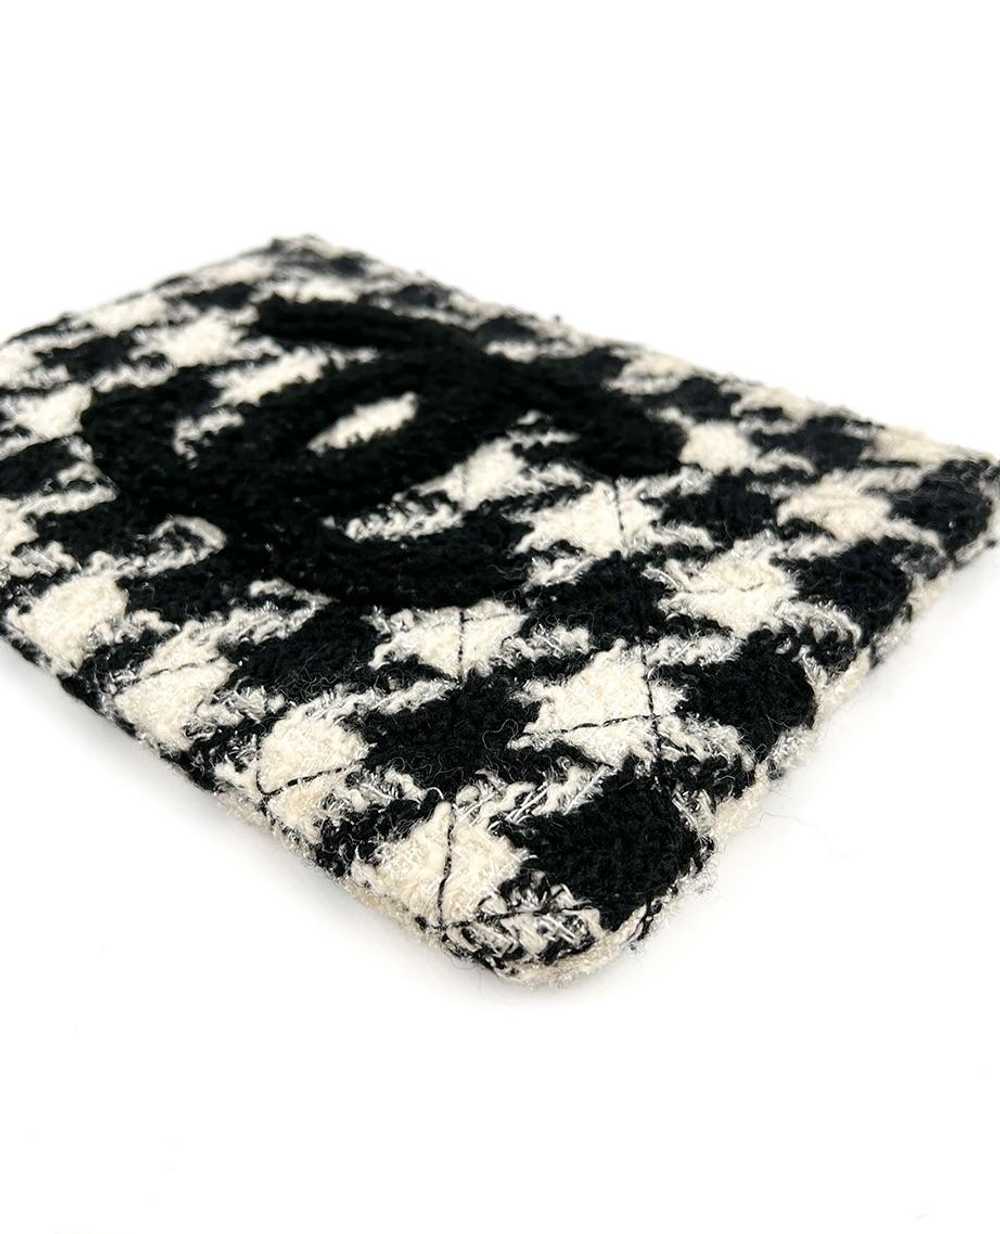 Product Details Houndstooth Tweed Zip Pouch - image 4